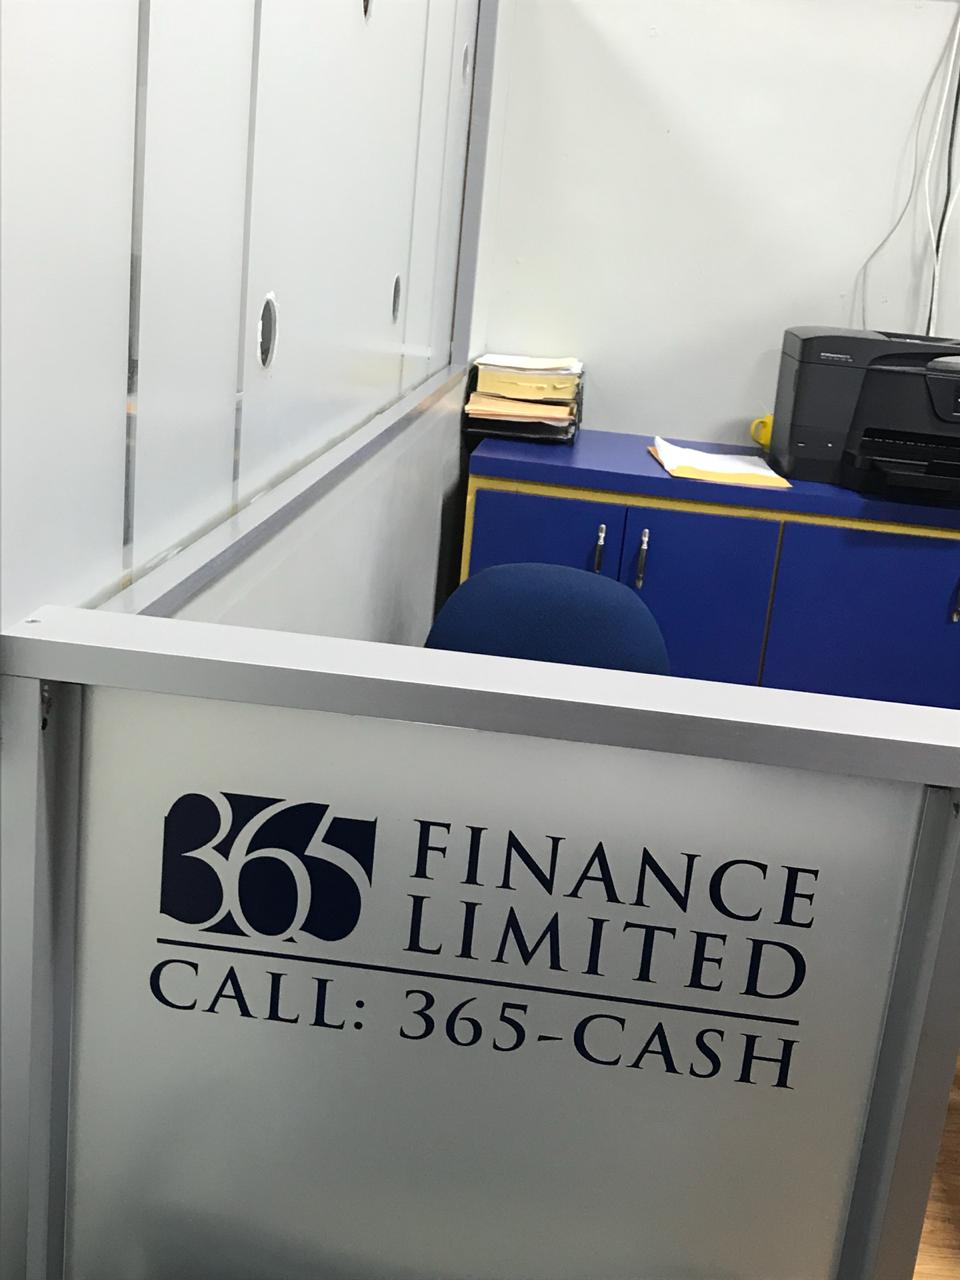 365 Finance Gallery images